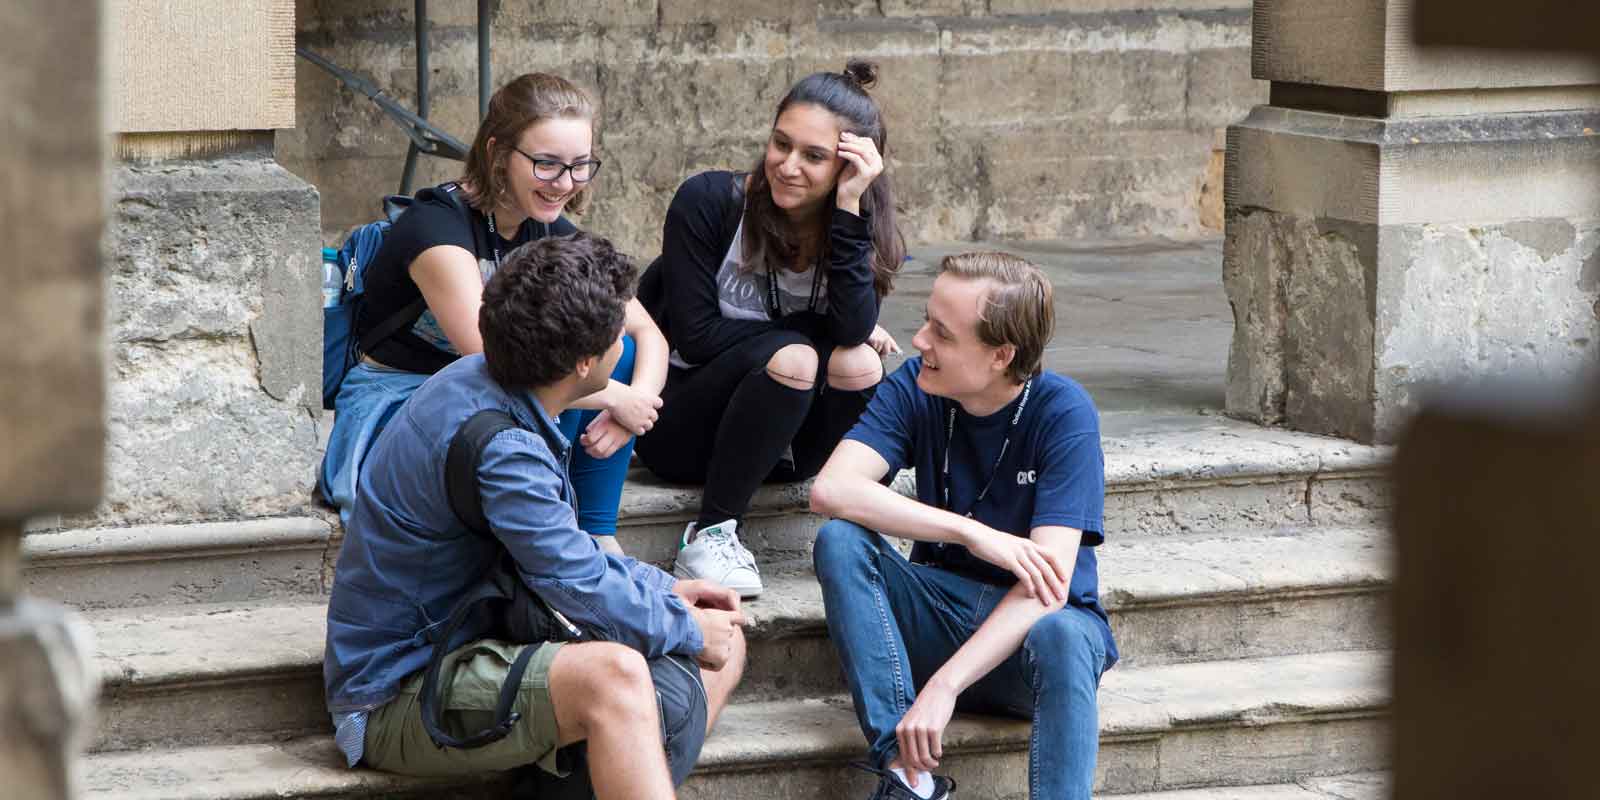 Students sitting on steps at Oxford college